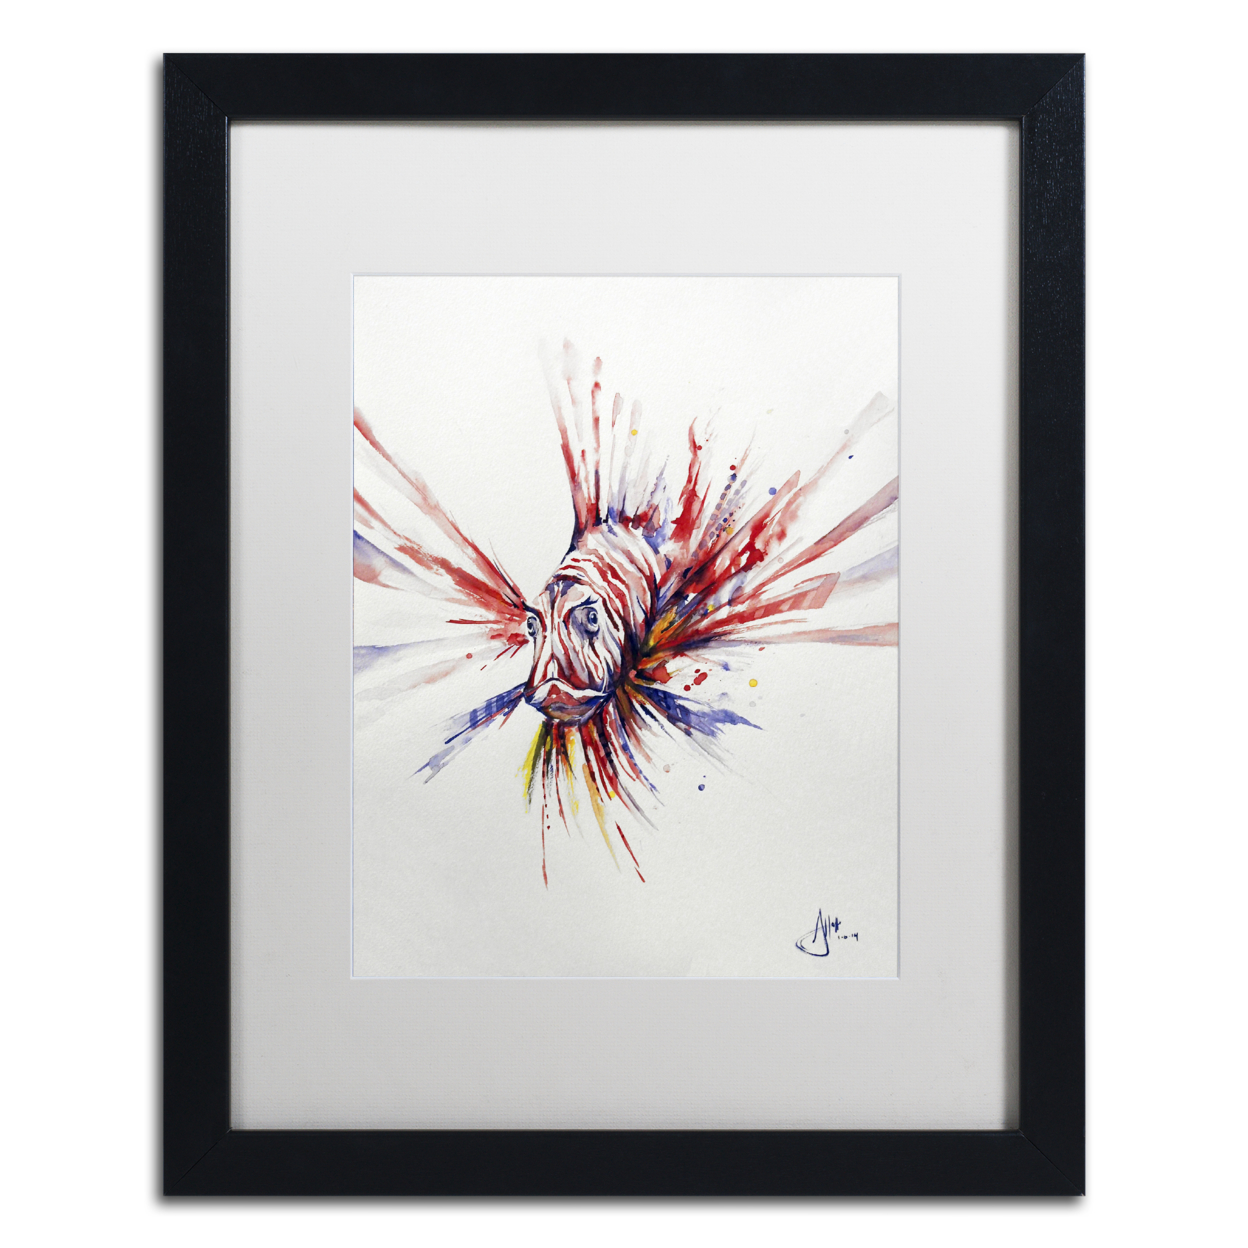 Marc Allante 'Pterois' Black Wooden Framed Art 18 X 22 Inches